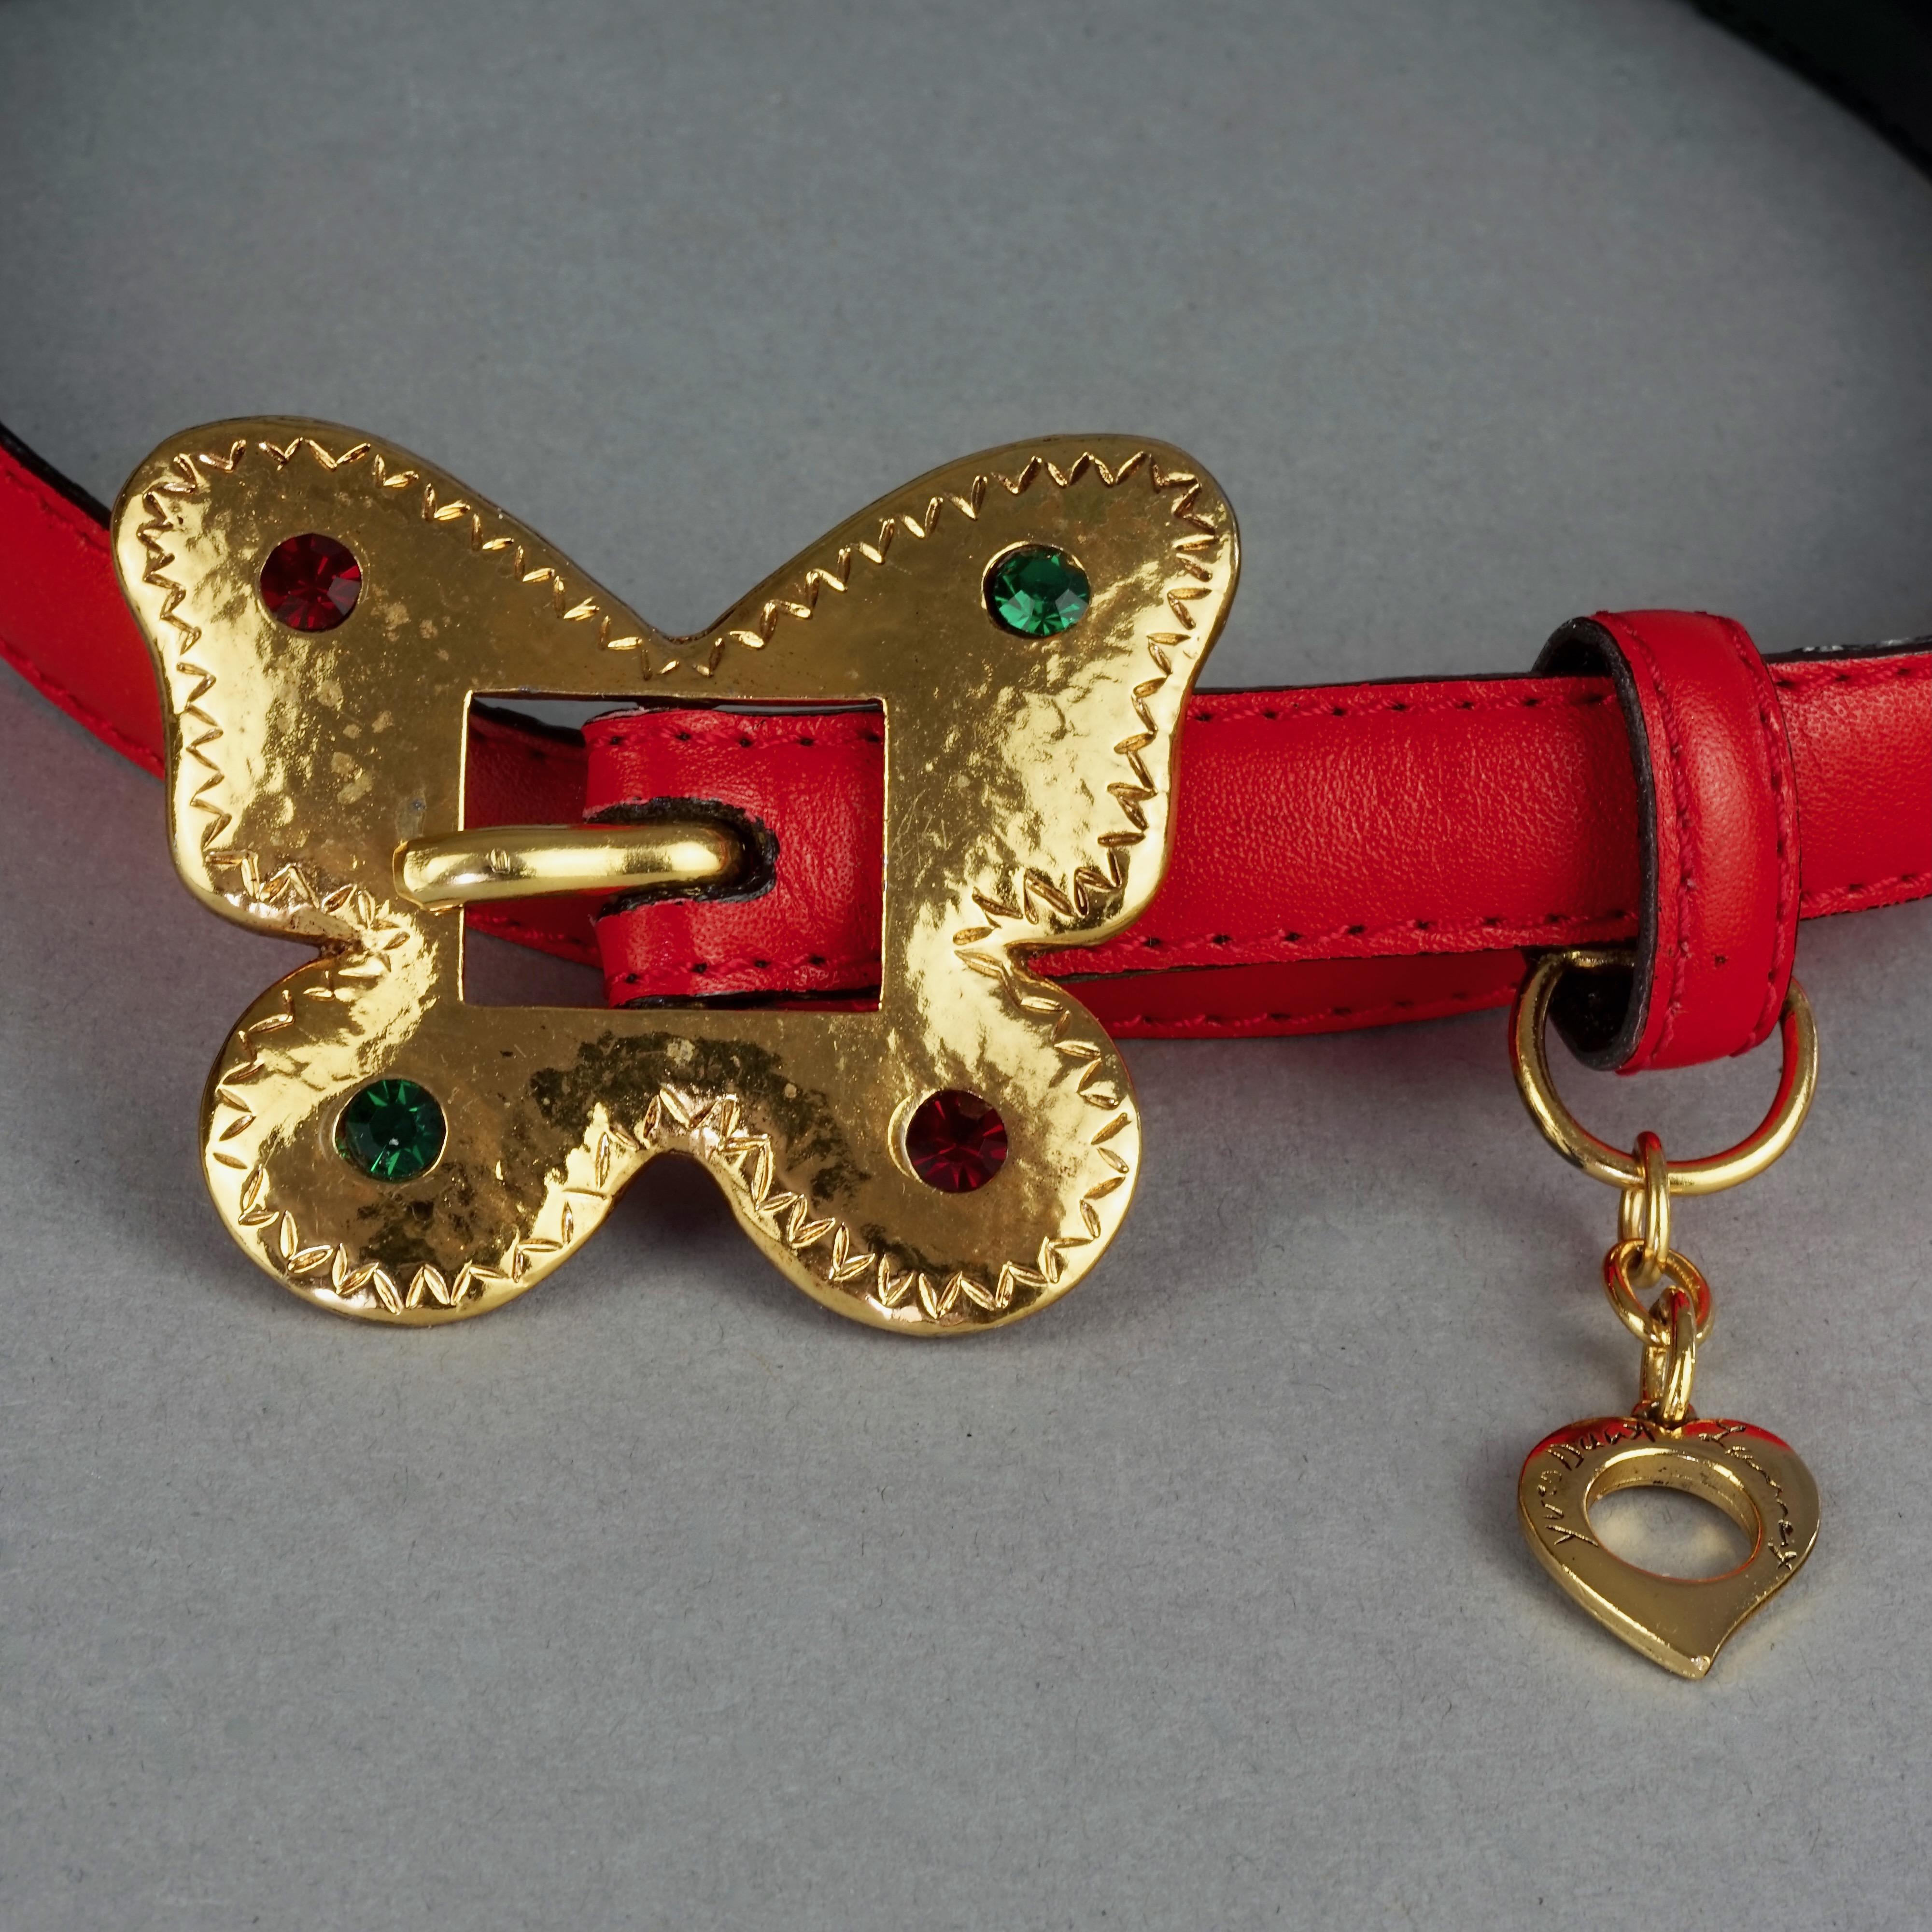 Vintage YVES SAINT LAURENT Ysl Jewelled Butterfly Red Leather Belt In Good Condition For Sale In Kingersheim, Alsace